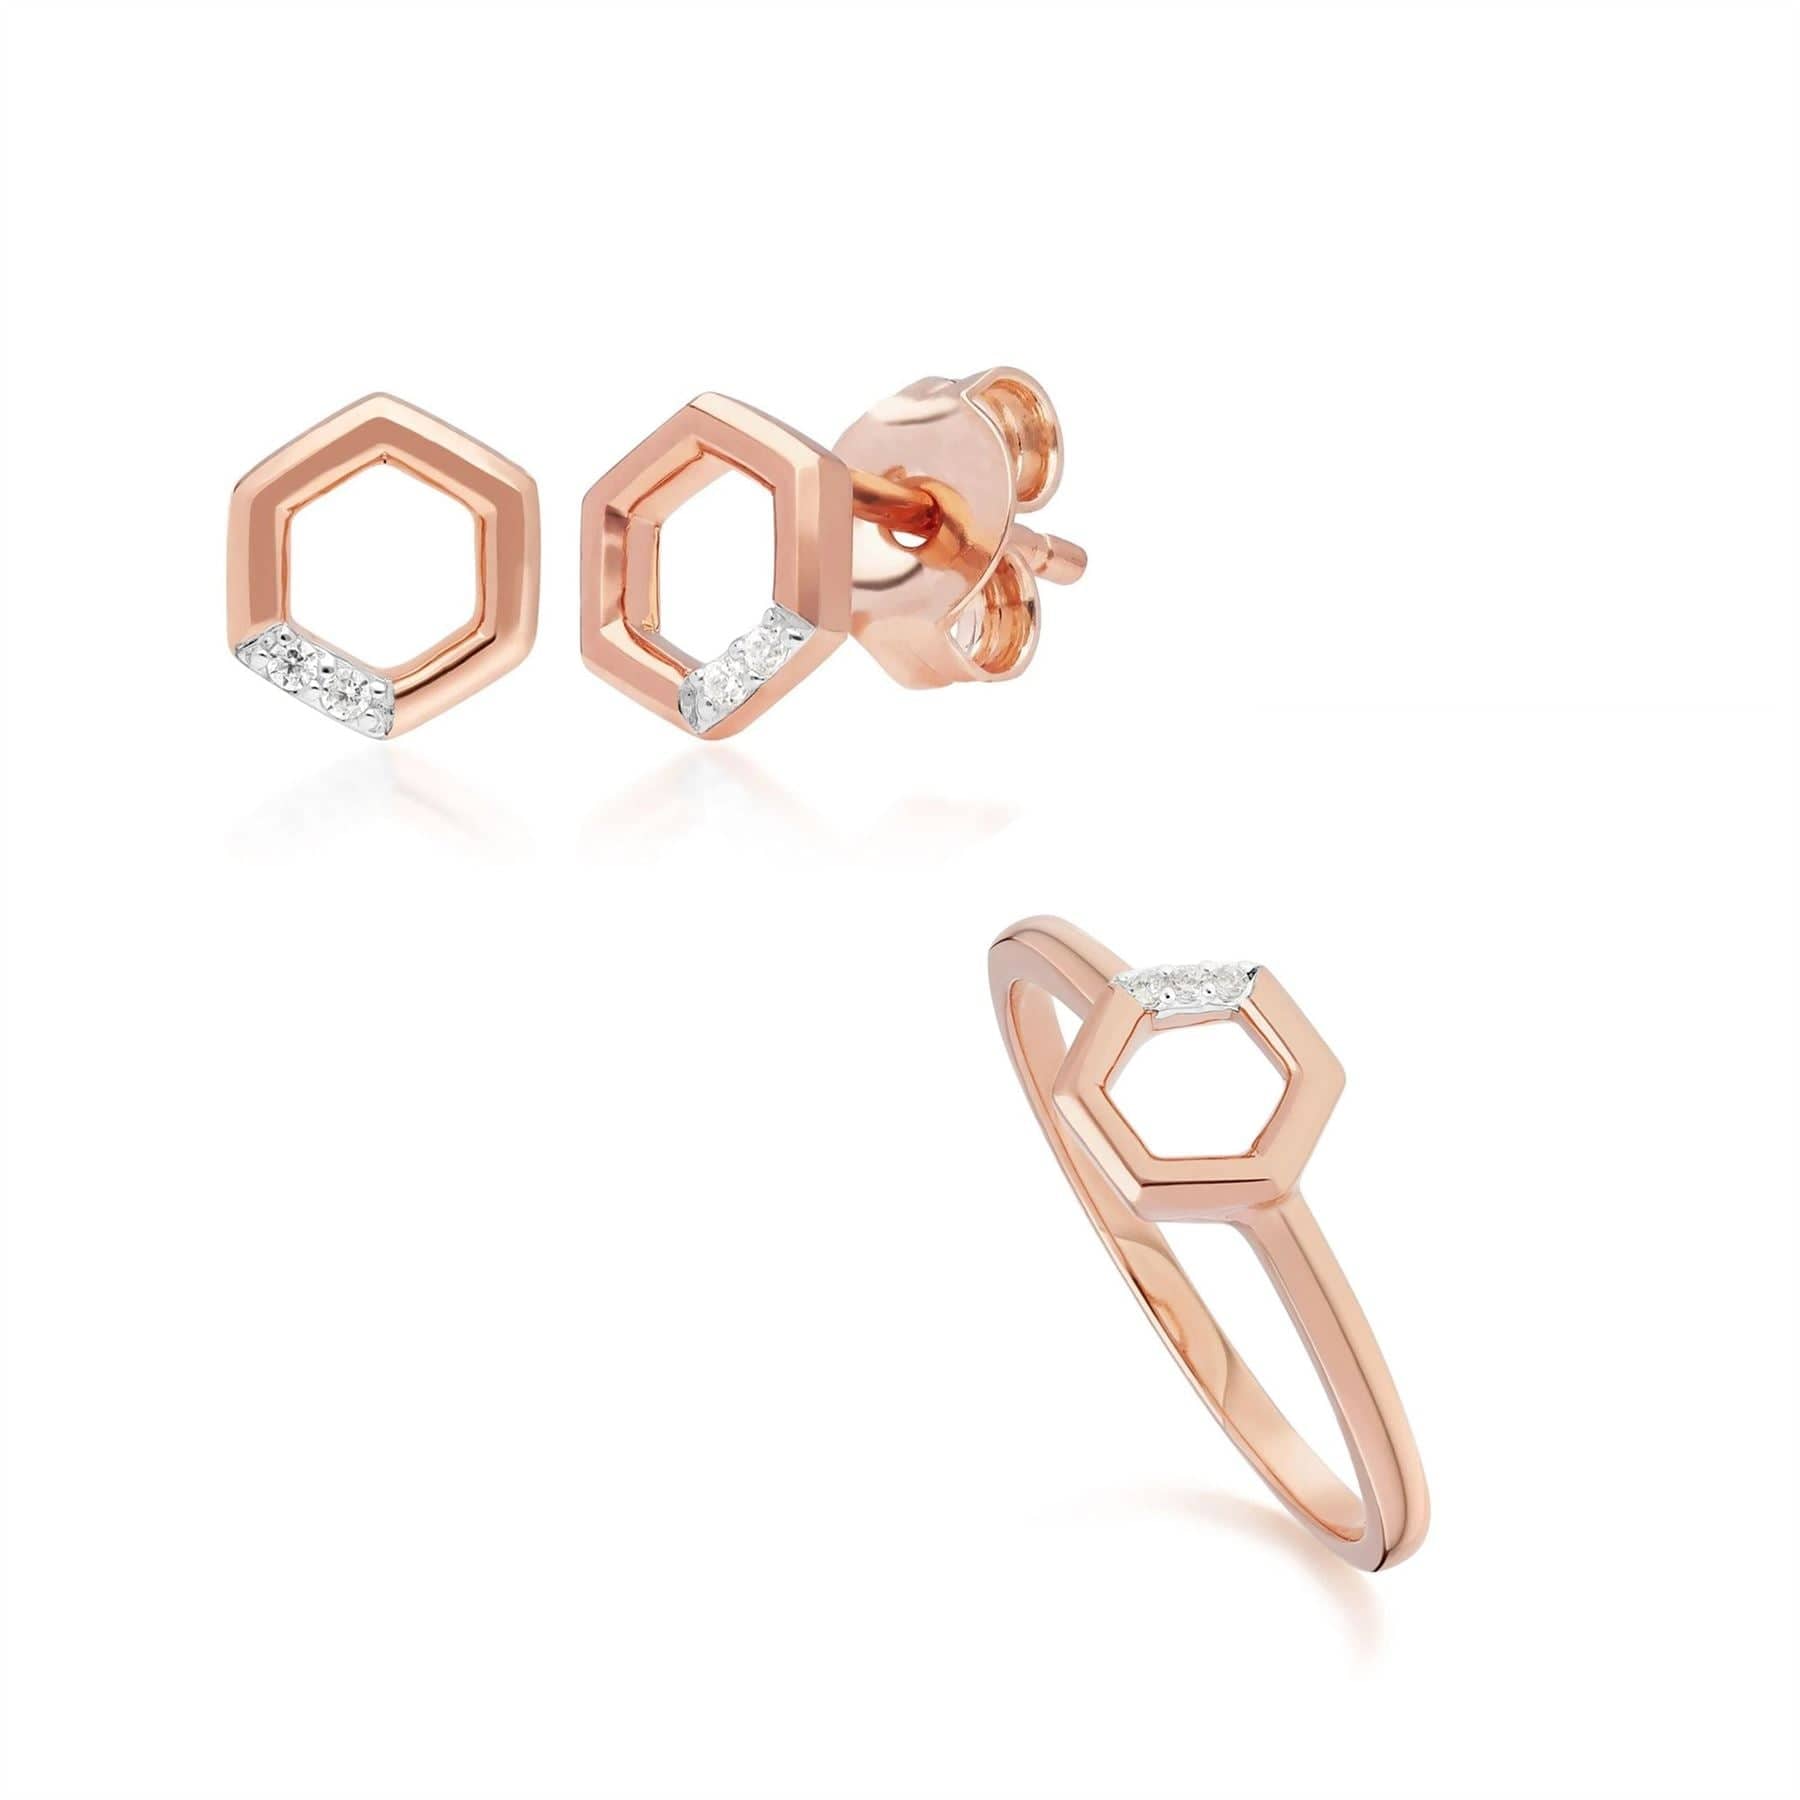 191E0400019-191R0906019 Diamond Pave Hexagon Stud Earring & Ring Set in 9ct Rose Gold 1